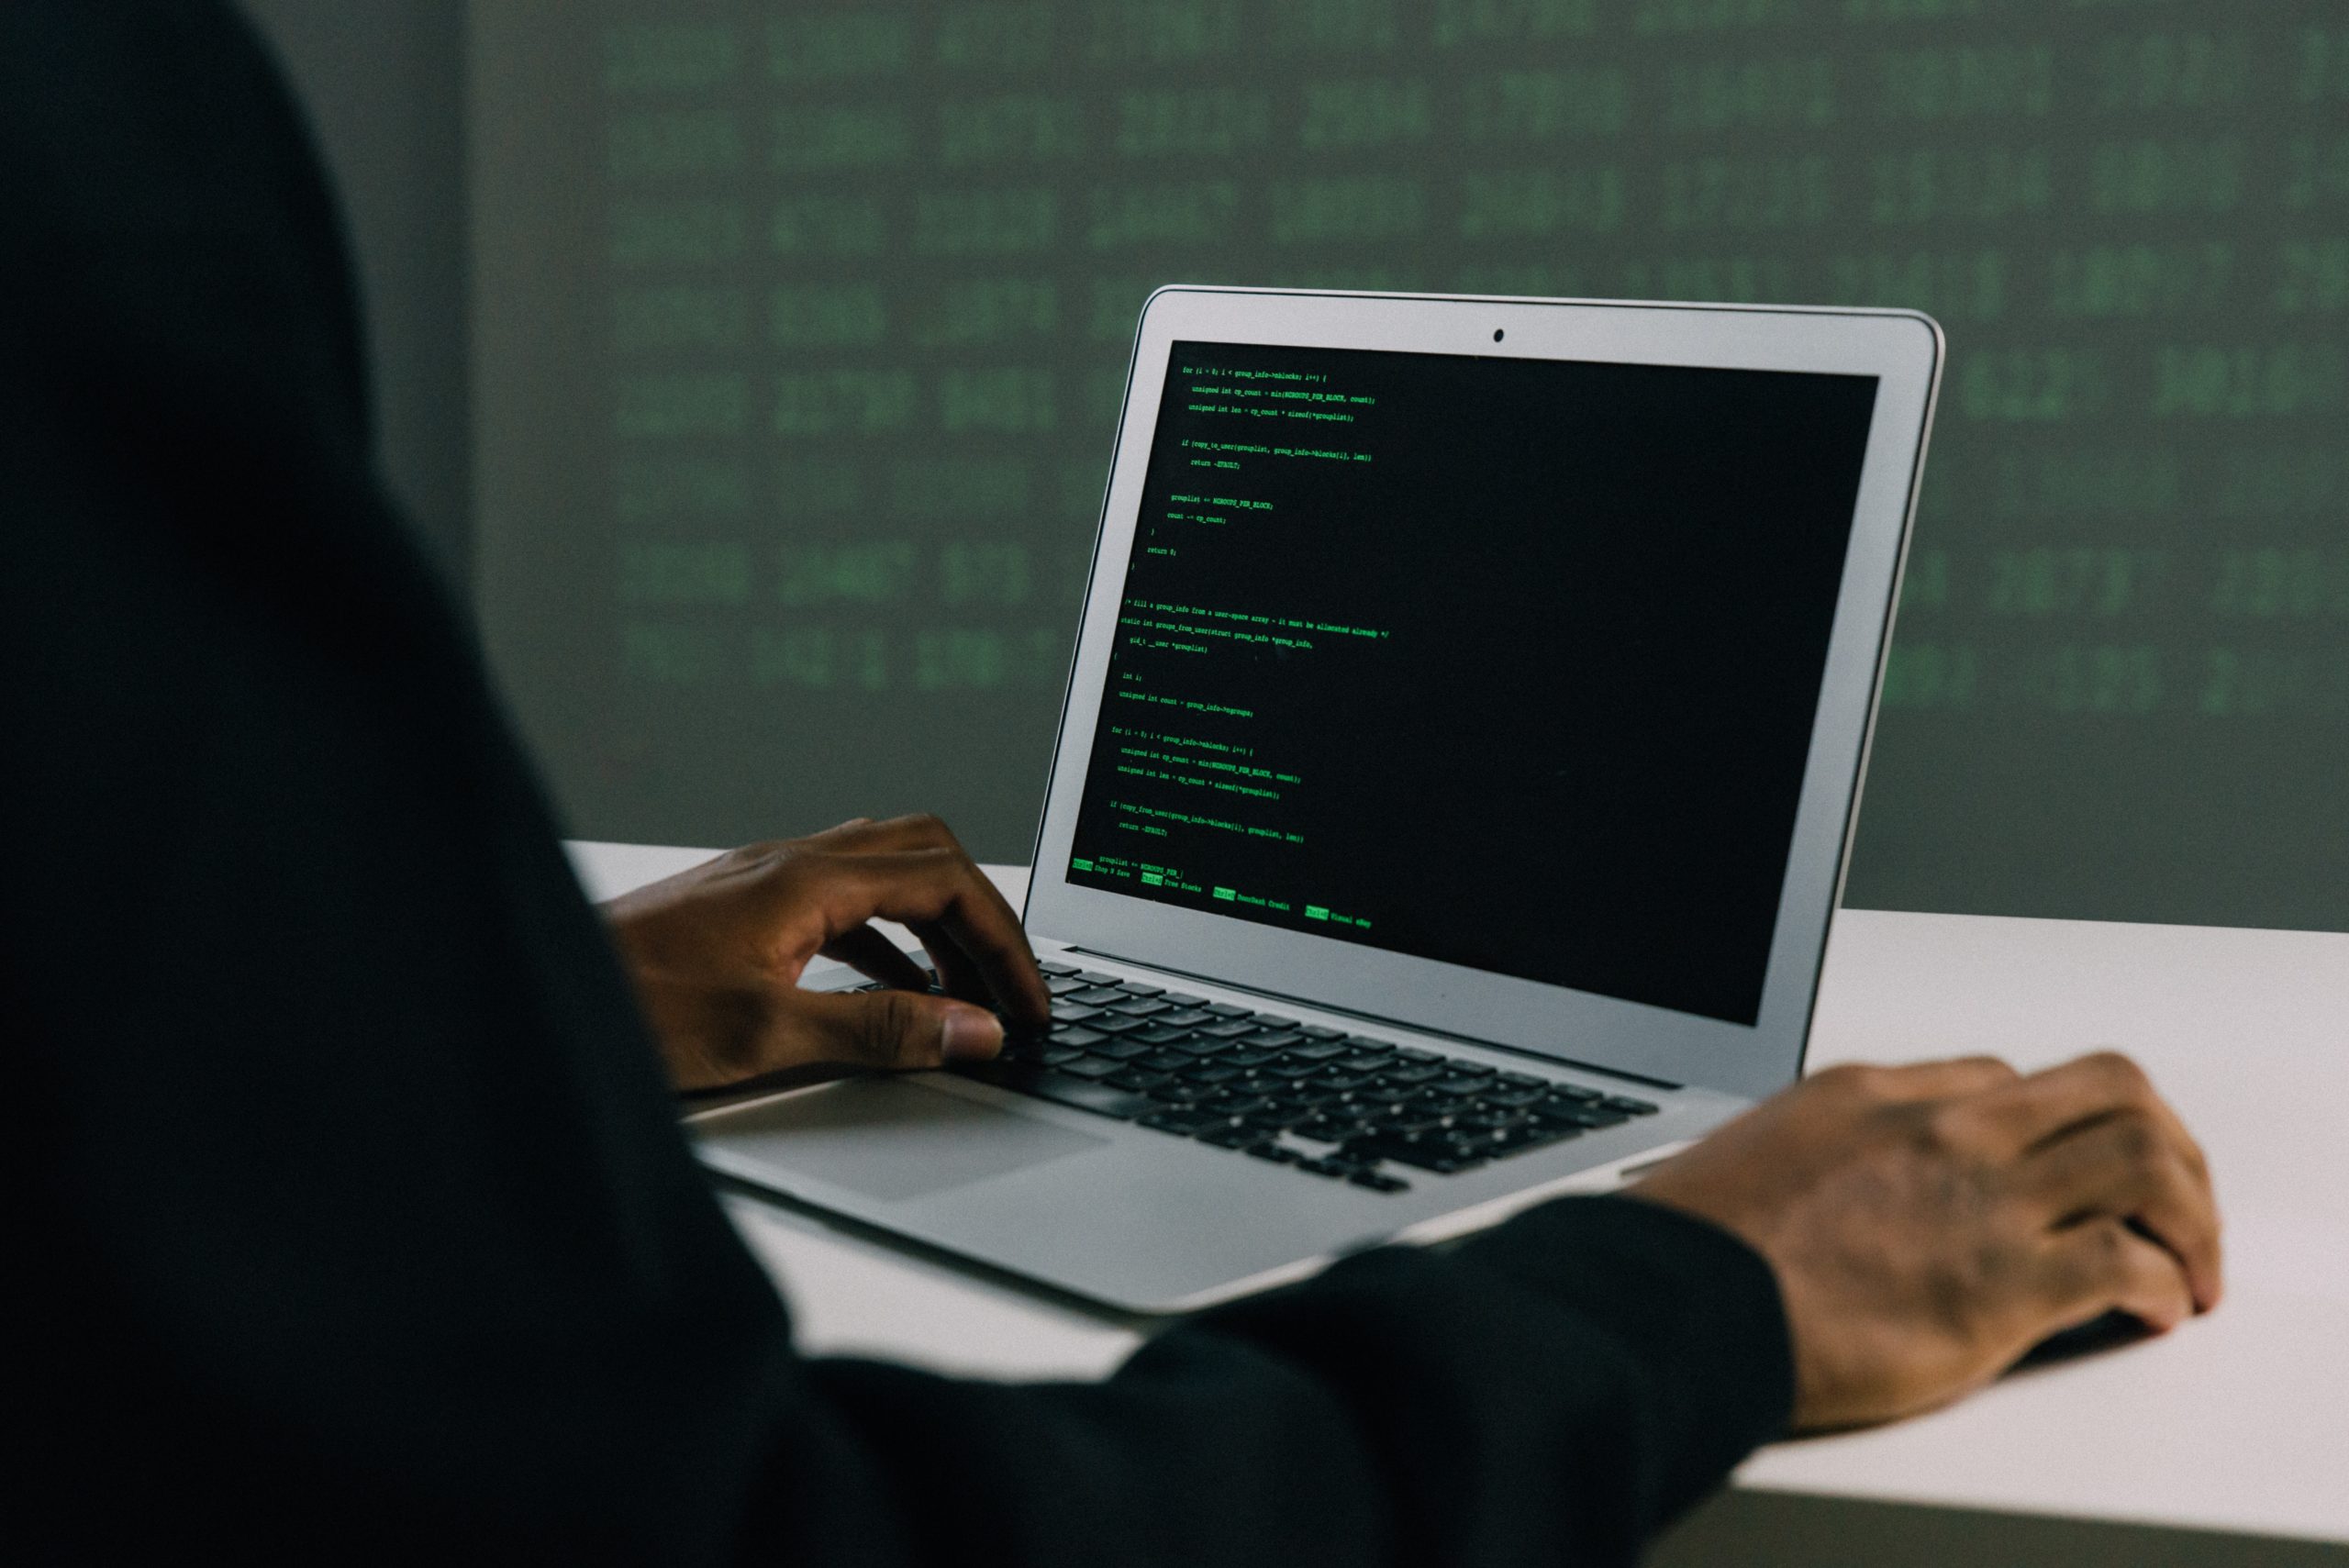 5 Ethical Hacking Tips to Jumpstart Your Career